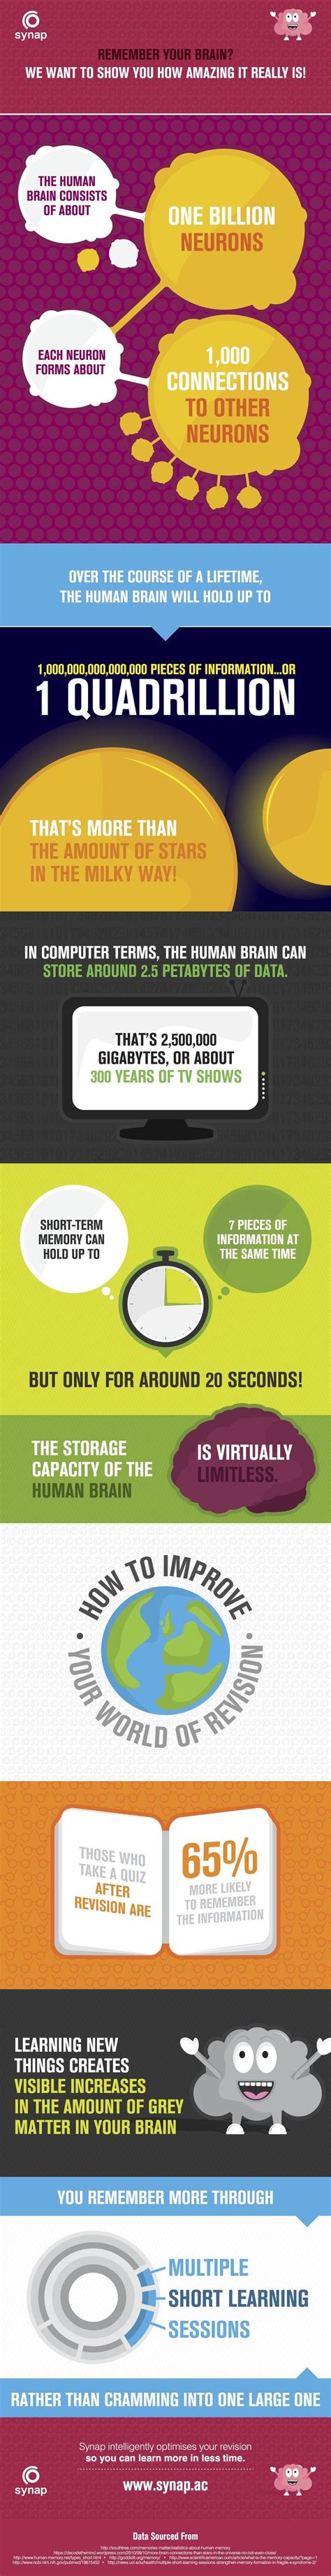 Your Amazing Memory Infographic E Learning Infographics